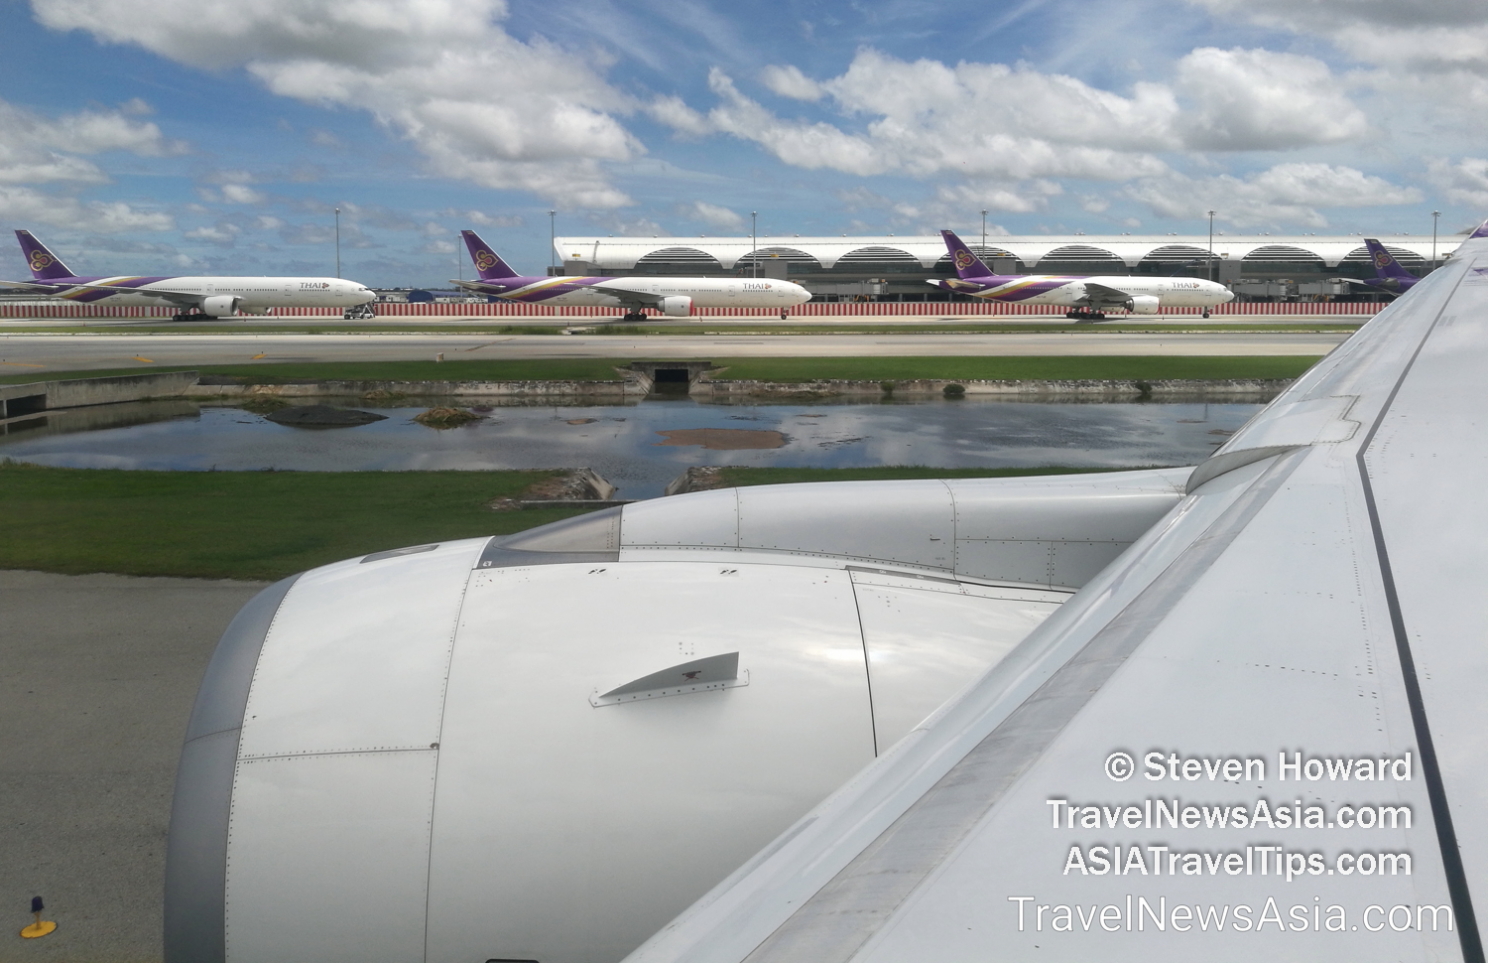 Thai Airways aircraft lined up at BKK in August 2020. Picture by Steven Howard of TravelNewsAsia.com Click to enlarge.